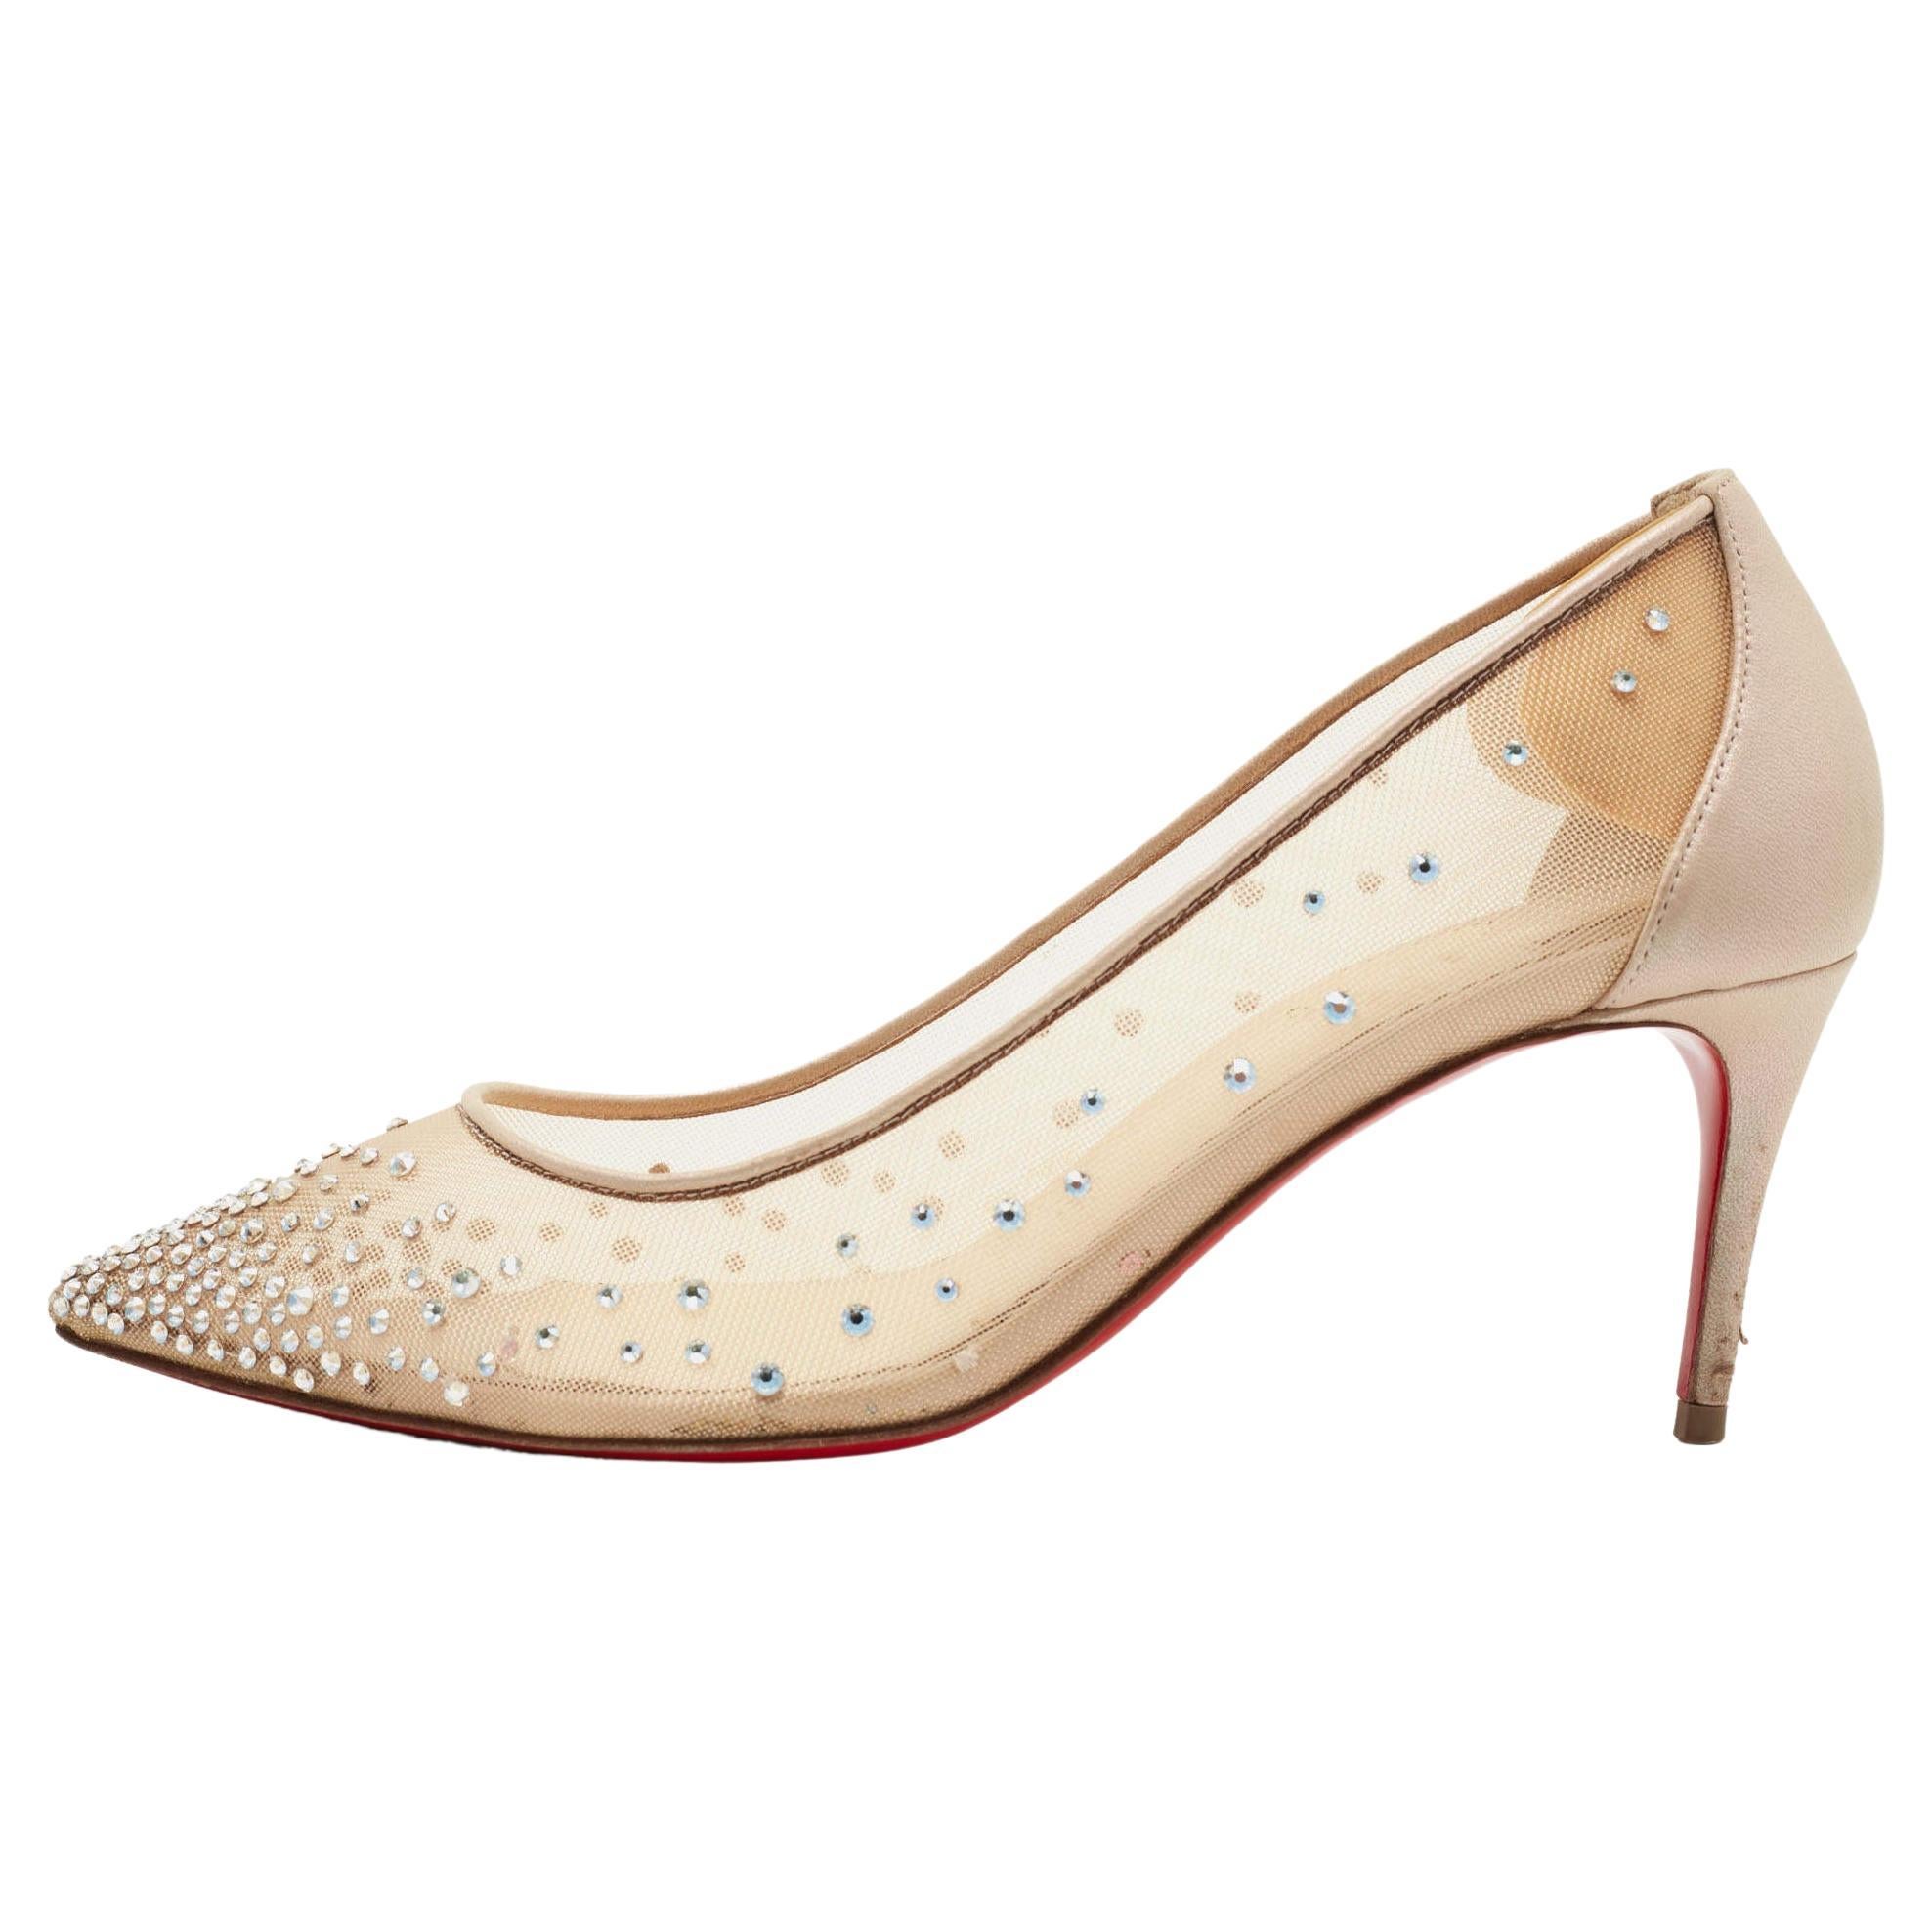 Follies Strass 70 crystal-embellished mesh and glittered suede slingback  pumps